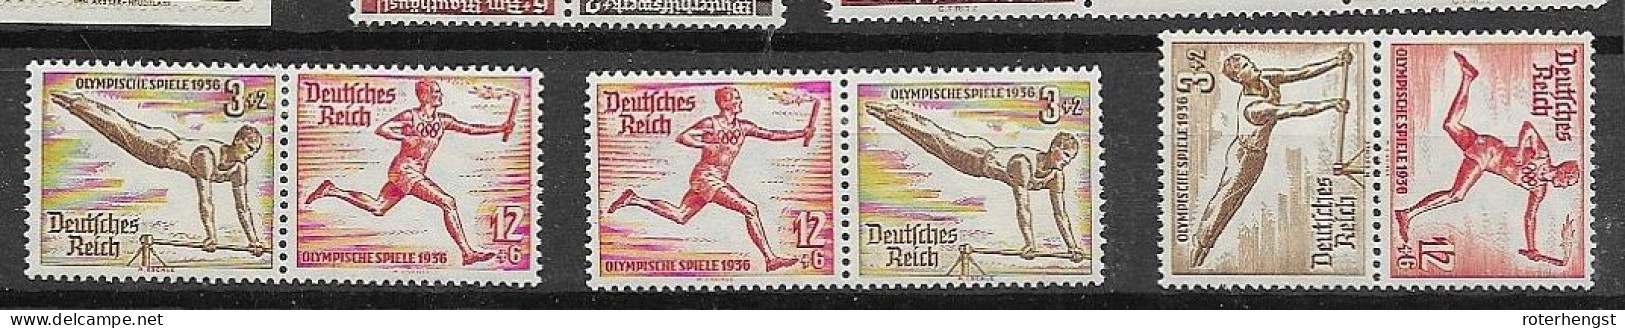 Reich From Booklet Panes 1936 Mlh *  And Mnh ** (right Better Pair) 44 Euros - Cuadernillos